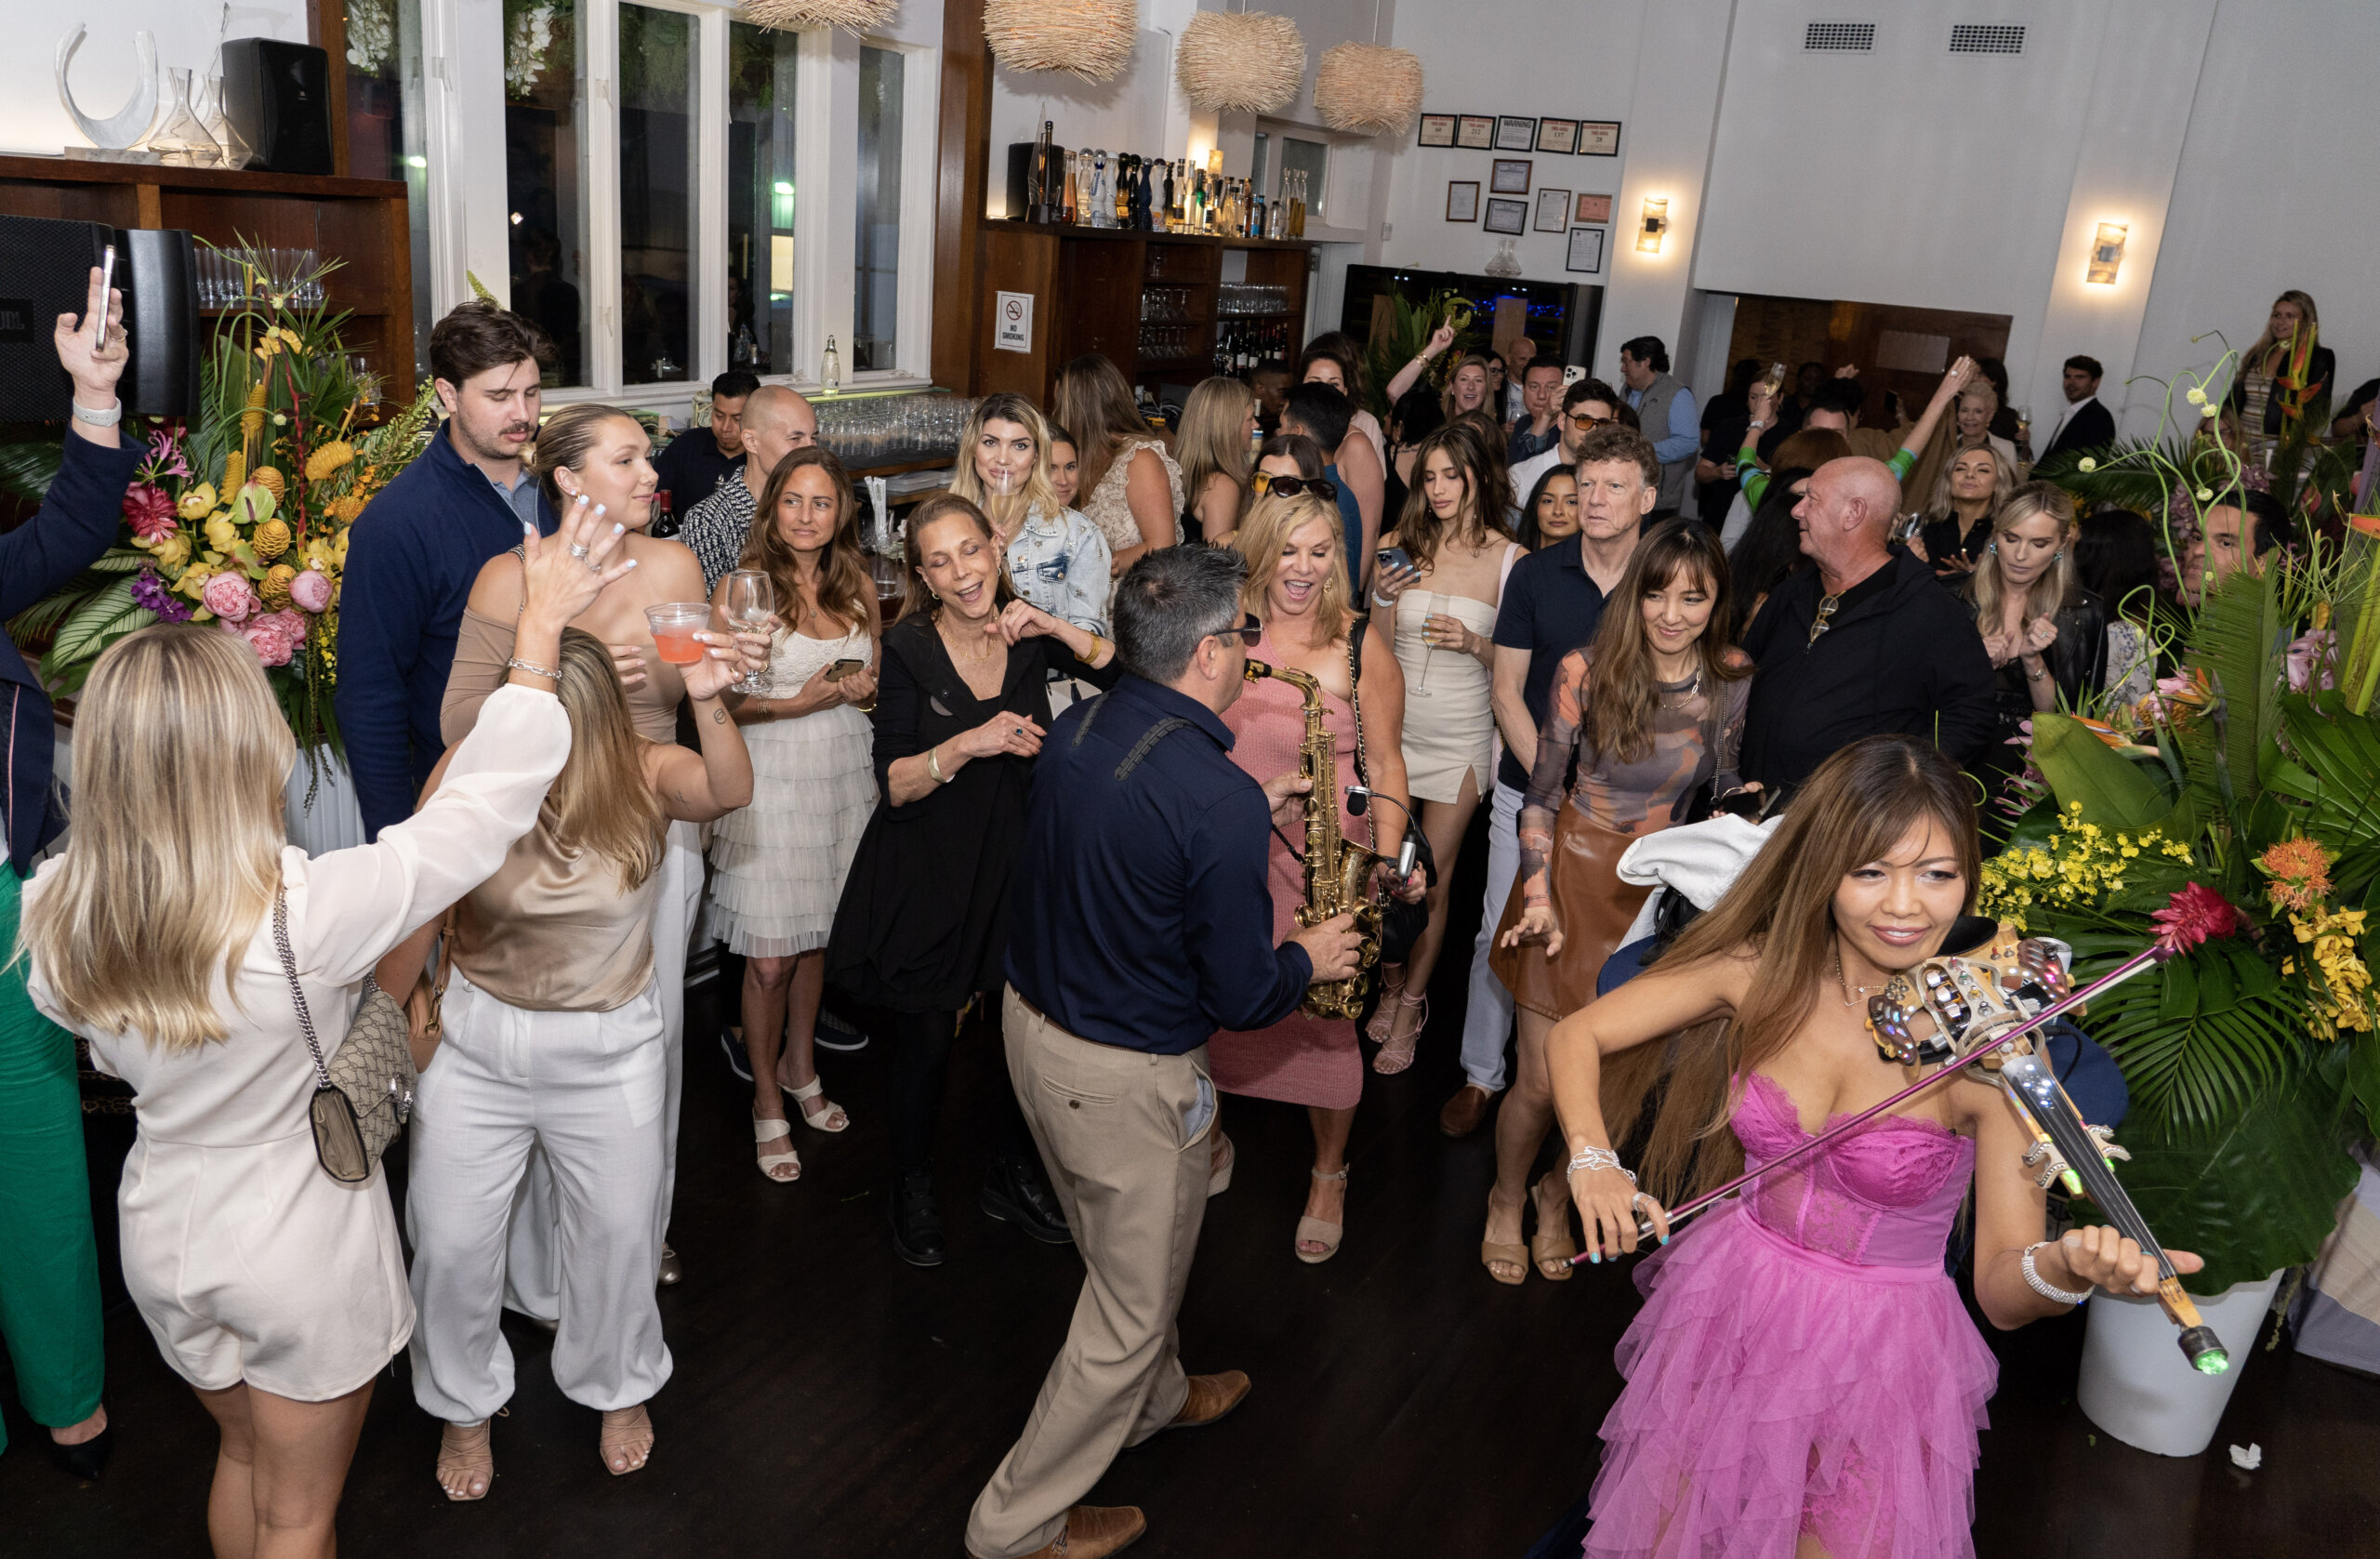 Dan's Chefs of the Hamptons was a night to remember